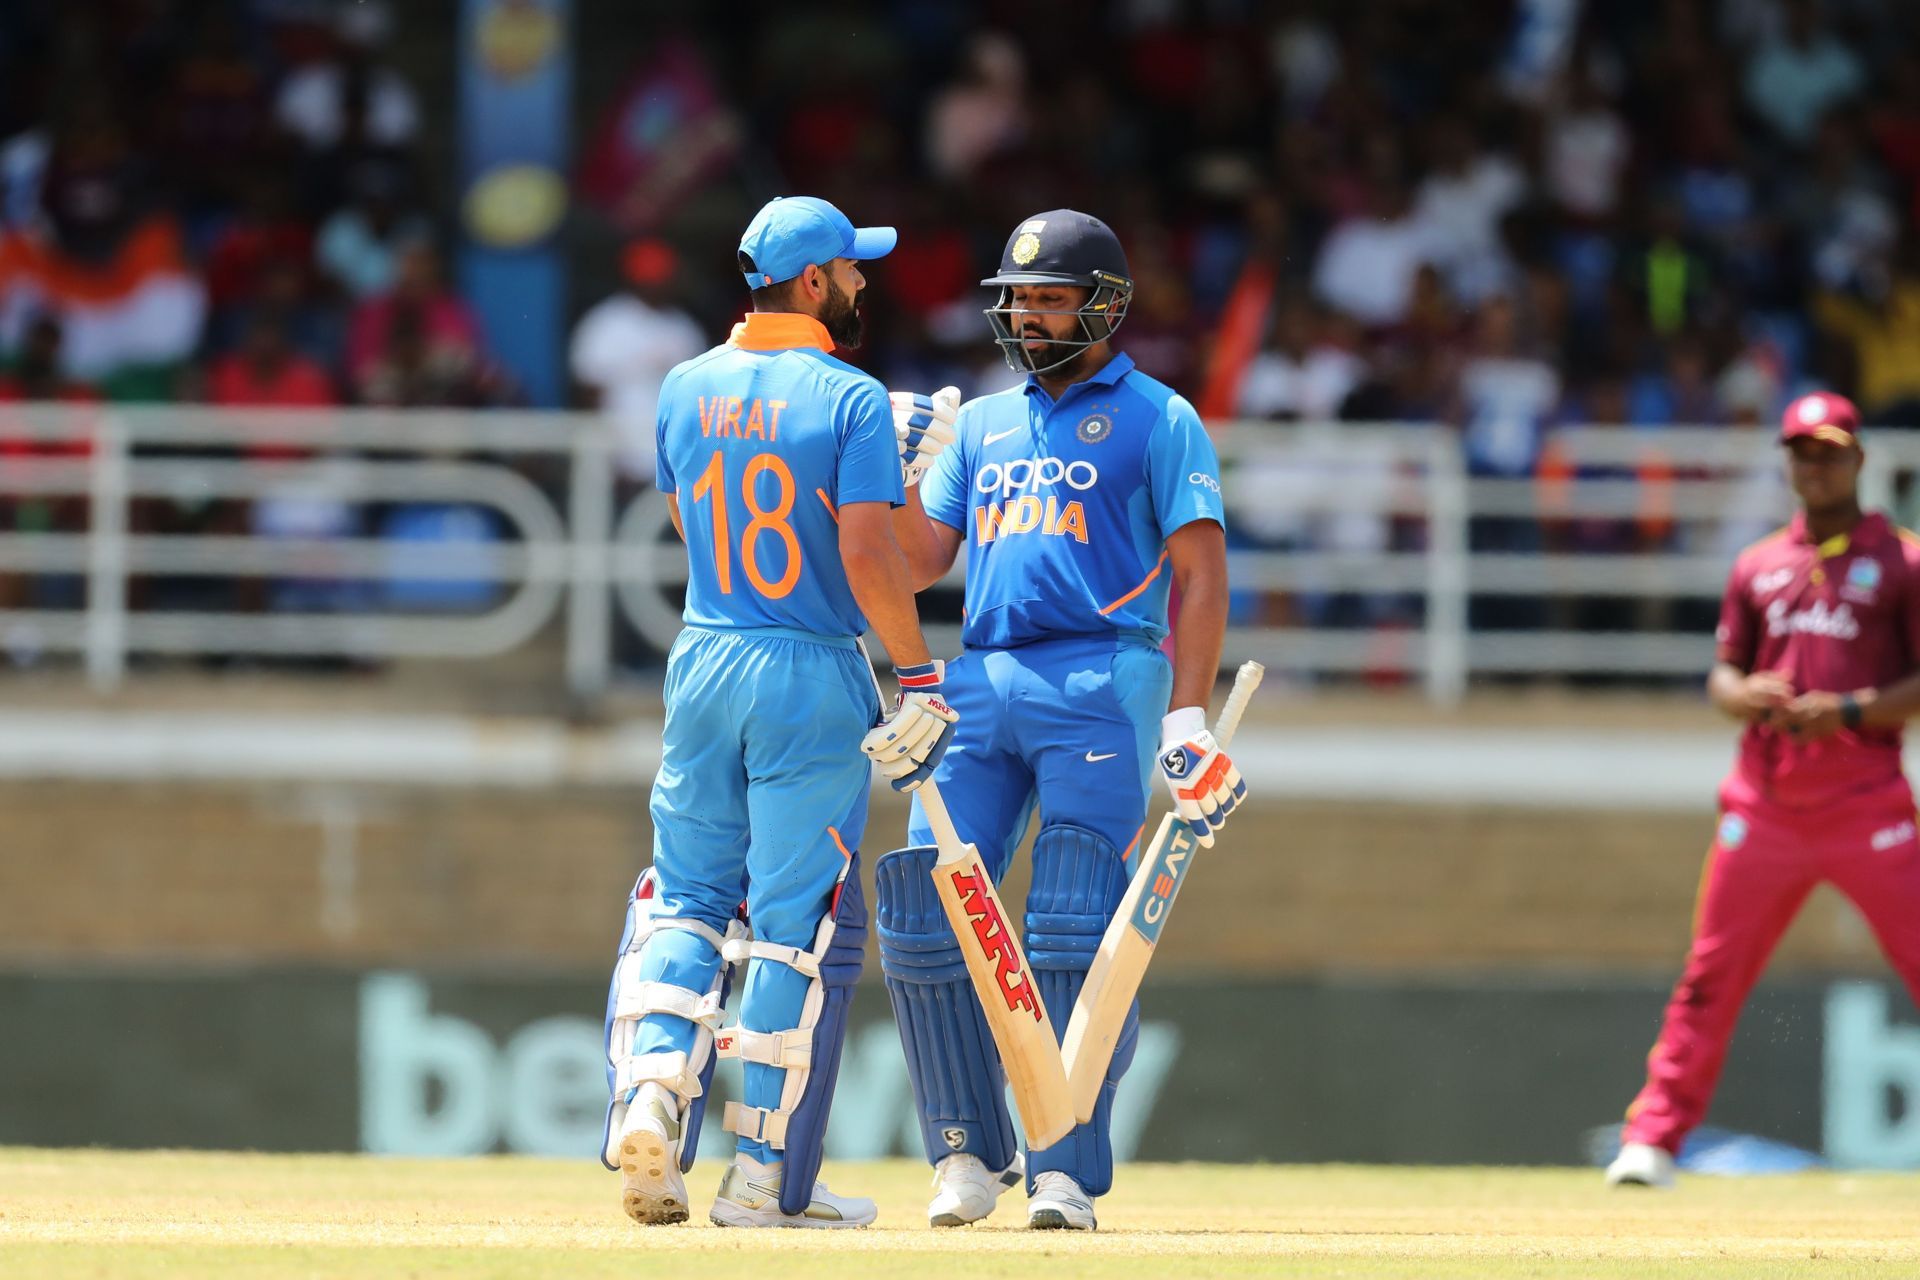 Virat Kohli and Rohit Sharma are the top-ranked Indian batters in the latest ICC ODI rankings